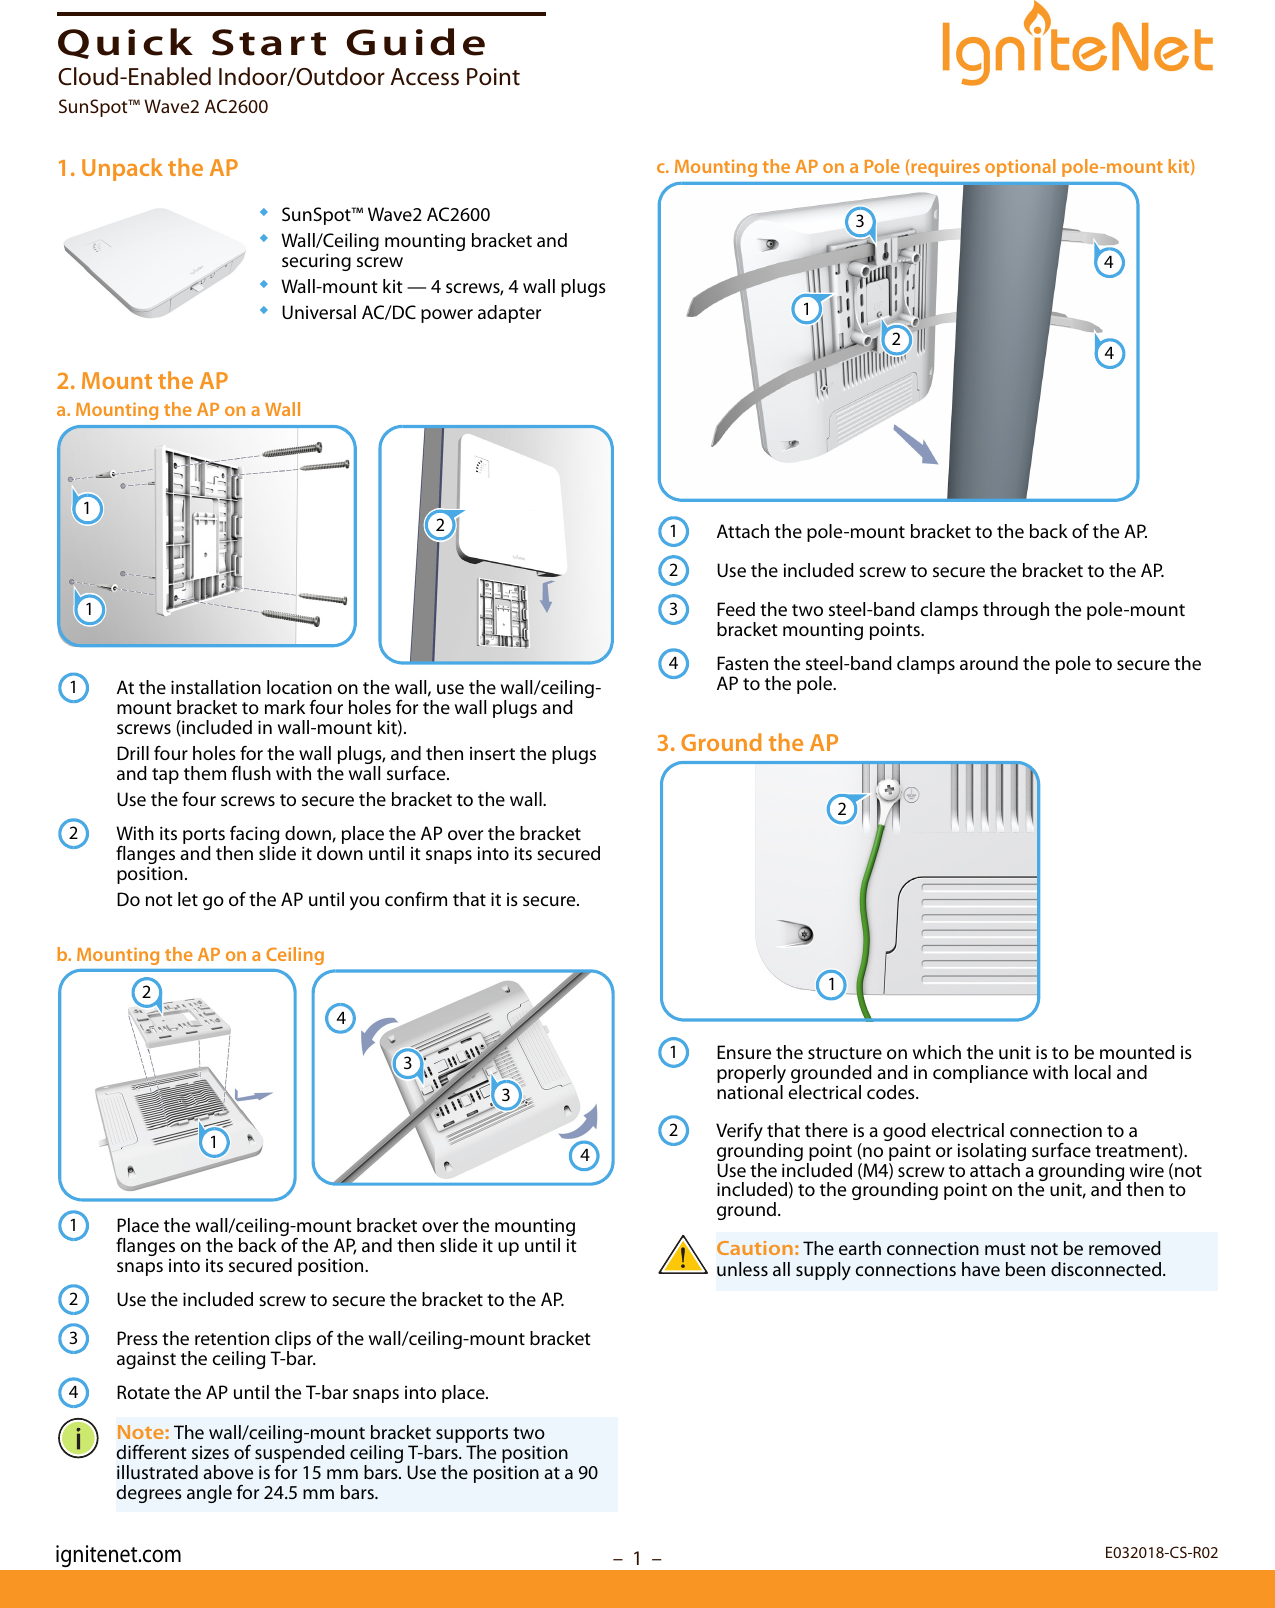 –  1  –Quick Start Guide1. Unpack the AP◆SunSpot™ Wave2 AC2600◆Wall/Ceiling mounting bracket and securing screw◆Wall-mount kit — 4 screws, 4 wall plugs◆Universal AC/DC power adapter2. Mount the APa. Mounting the AP on a WallAt the installation location on the wall, use the wall/ceiling-mount bracket to mark four holes for the wall plugs and screws (included in wall-mount kit).Drill four holes for the wall plugs, and then insert the plugs and tap them flush with the wall surface. Use the four screws to secure the bracket to the wall.With its ports facing down, place the AP over the bracket flanges and then slide it down until it snaps into its secured position.Do not let go of the AP until you confirm that it is secure.b. Mounting the AP on a CeilingPlace the wall/ceiling-mount bracket over the mounting flanges on the back of the AP, and then slide it up until it snaps into its secured position.Use the included screw to secure the bracket to the AP.Press the retention clips of the wall/ceiling-mount bracket against the ceiling T-bar.Rotate the AP until the T-bar snaps into place.Note: The wall/ceiling-mount bracket supports two different sizes of suspended ceiling T-bars. The position illustrated above is for 15 mm bars. Use the position at a 90 degrees angle for 24.5 mm bars.112123344211234c. Mounting the AP on a Pole (requires optional pole-mount kit)Attach the pole-mount bracket to the back of the AP. Use the included screw to secure the bracket to the AP.Feed the two steel-band clamps through the pole-mount bracket mounting points.Fasten the steel-band clamps around the pole to secure the AP to the pole.3. Ground the APEnsure the structure on which the unit is to be mounted is properly grounded and in compliance with local and national electrical codes. Verify that there is a good electrical connection to a grounding point (no paint or isolating surface treatment). Use the included (M4) screw to attach a grounding wire (not included) to the grounding point on the unit, and then to ground.Caution: The earth connection must not be removed unless all supply connections have been disconnected.1324412342112E032018-CS-R02Cloud-Enabled Indoor/Outdoor Access PointSunSpot™ Wave2 AC2600ignitenet.com